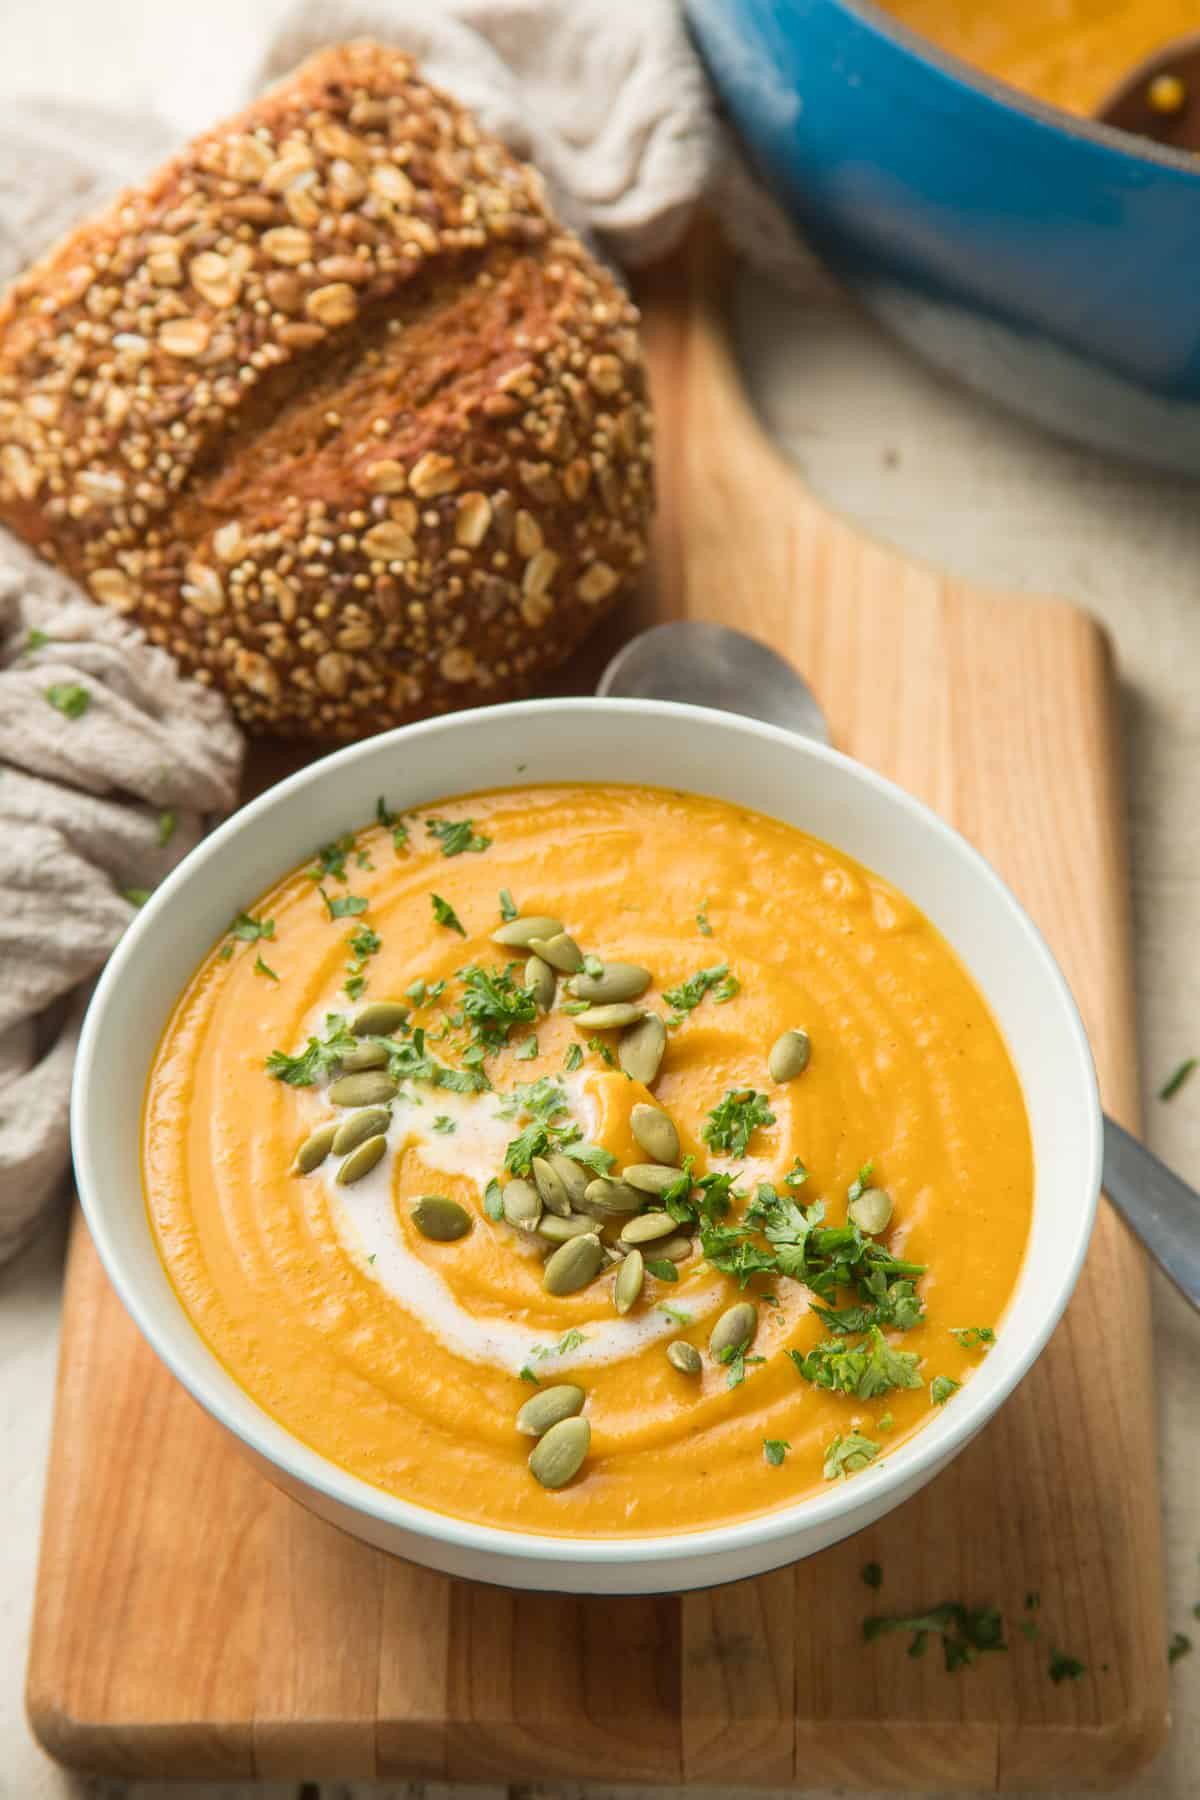 Bowl of Vegan Butternut Squash Soup Topped with Parsley and Pumpkin Seeds.